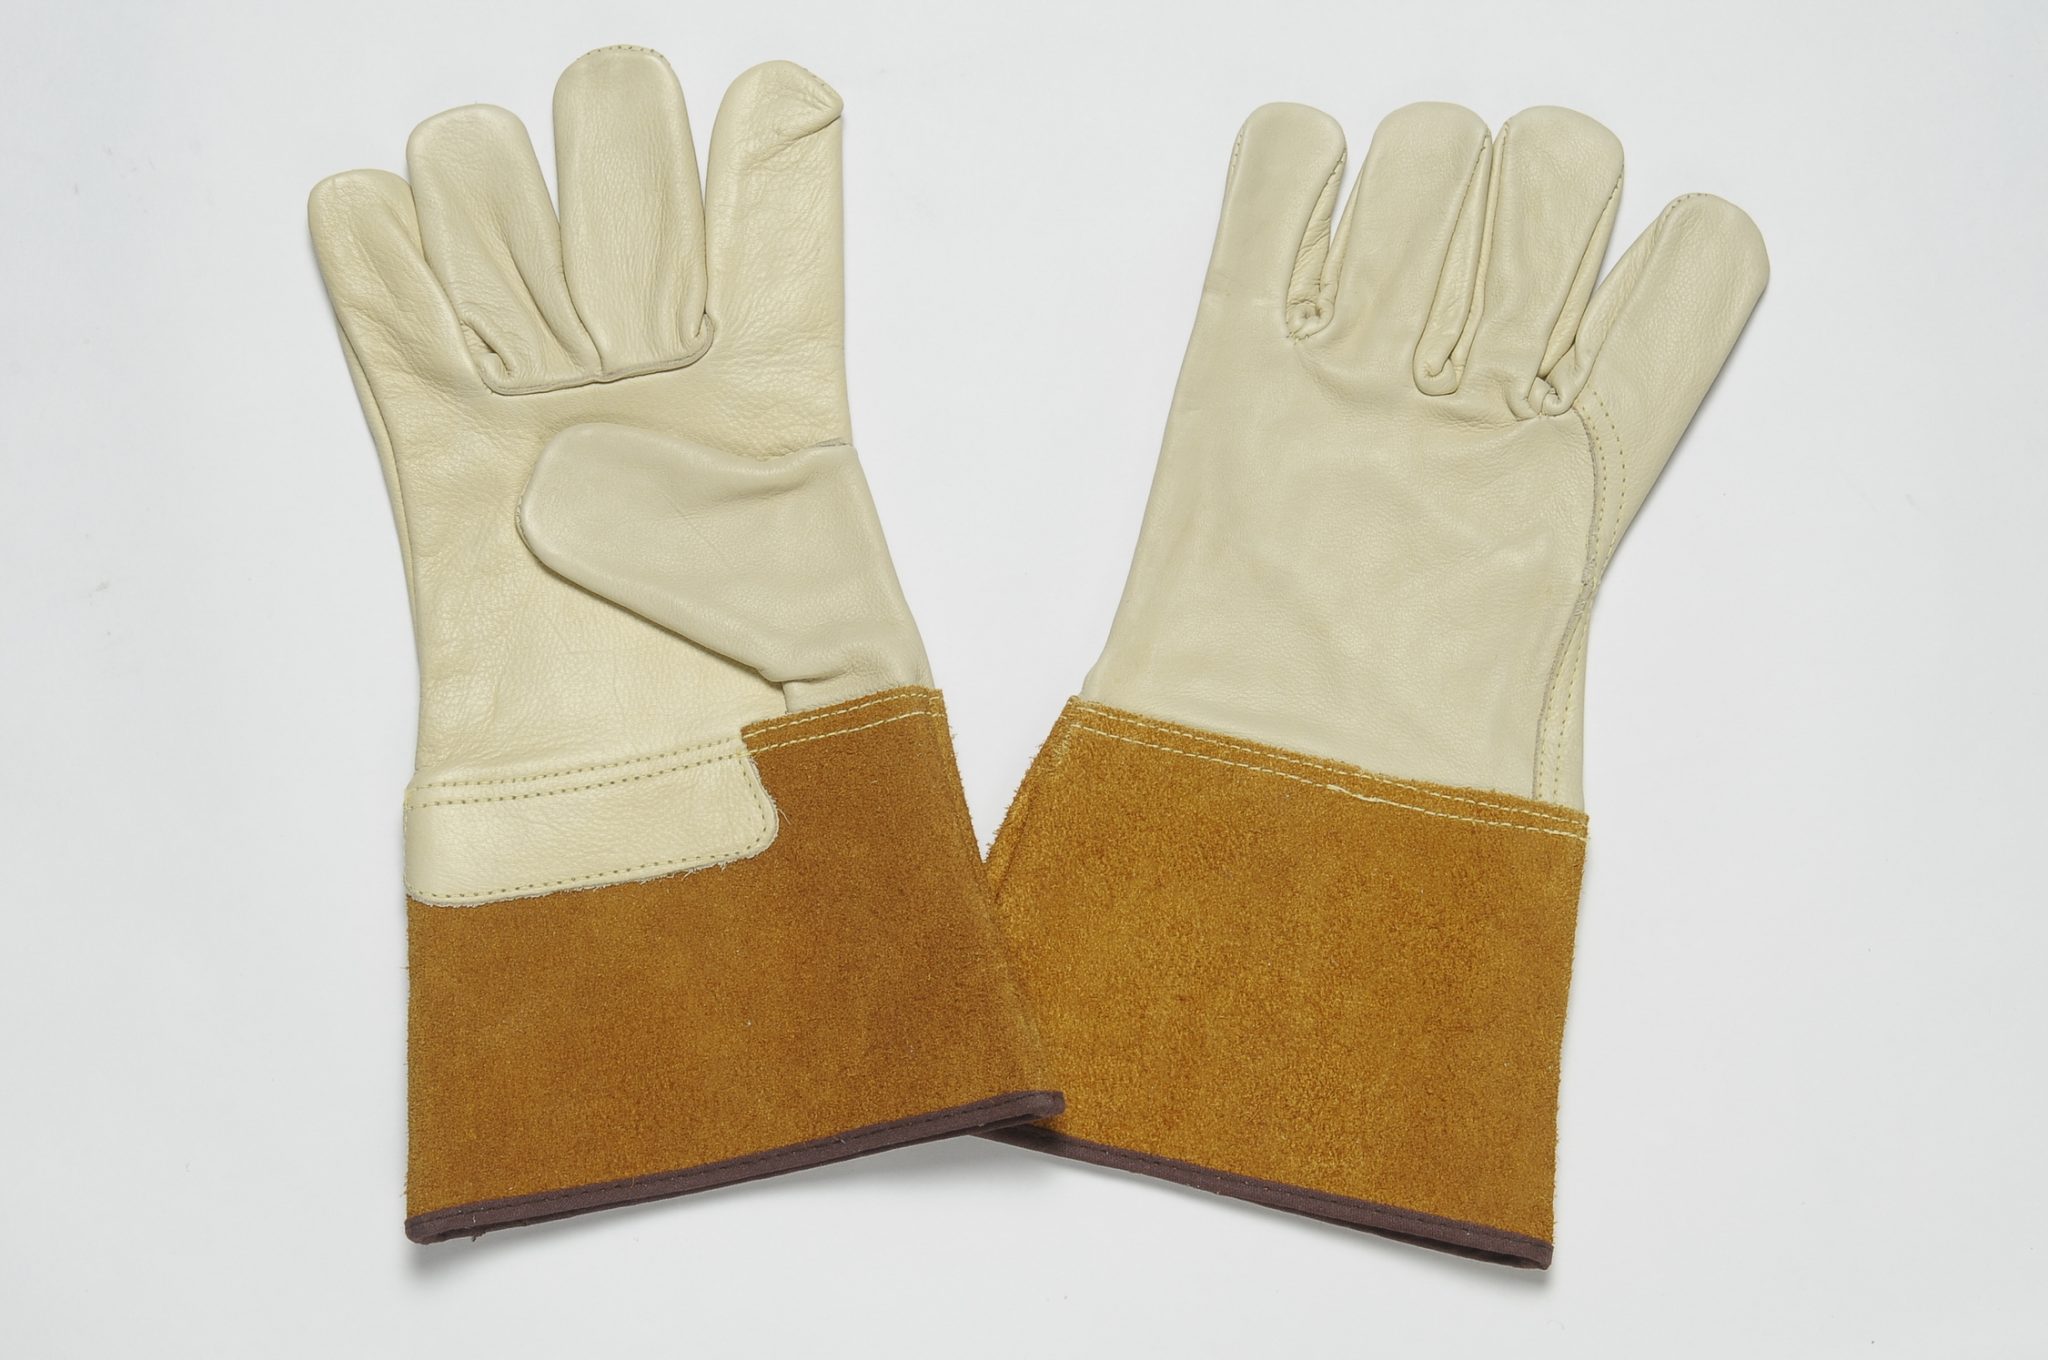 BEIGE ALL LEATHER GLOVES. GRAIN PALM AND BACK. SPLIT CUFF